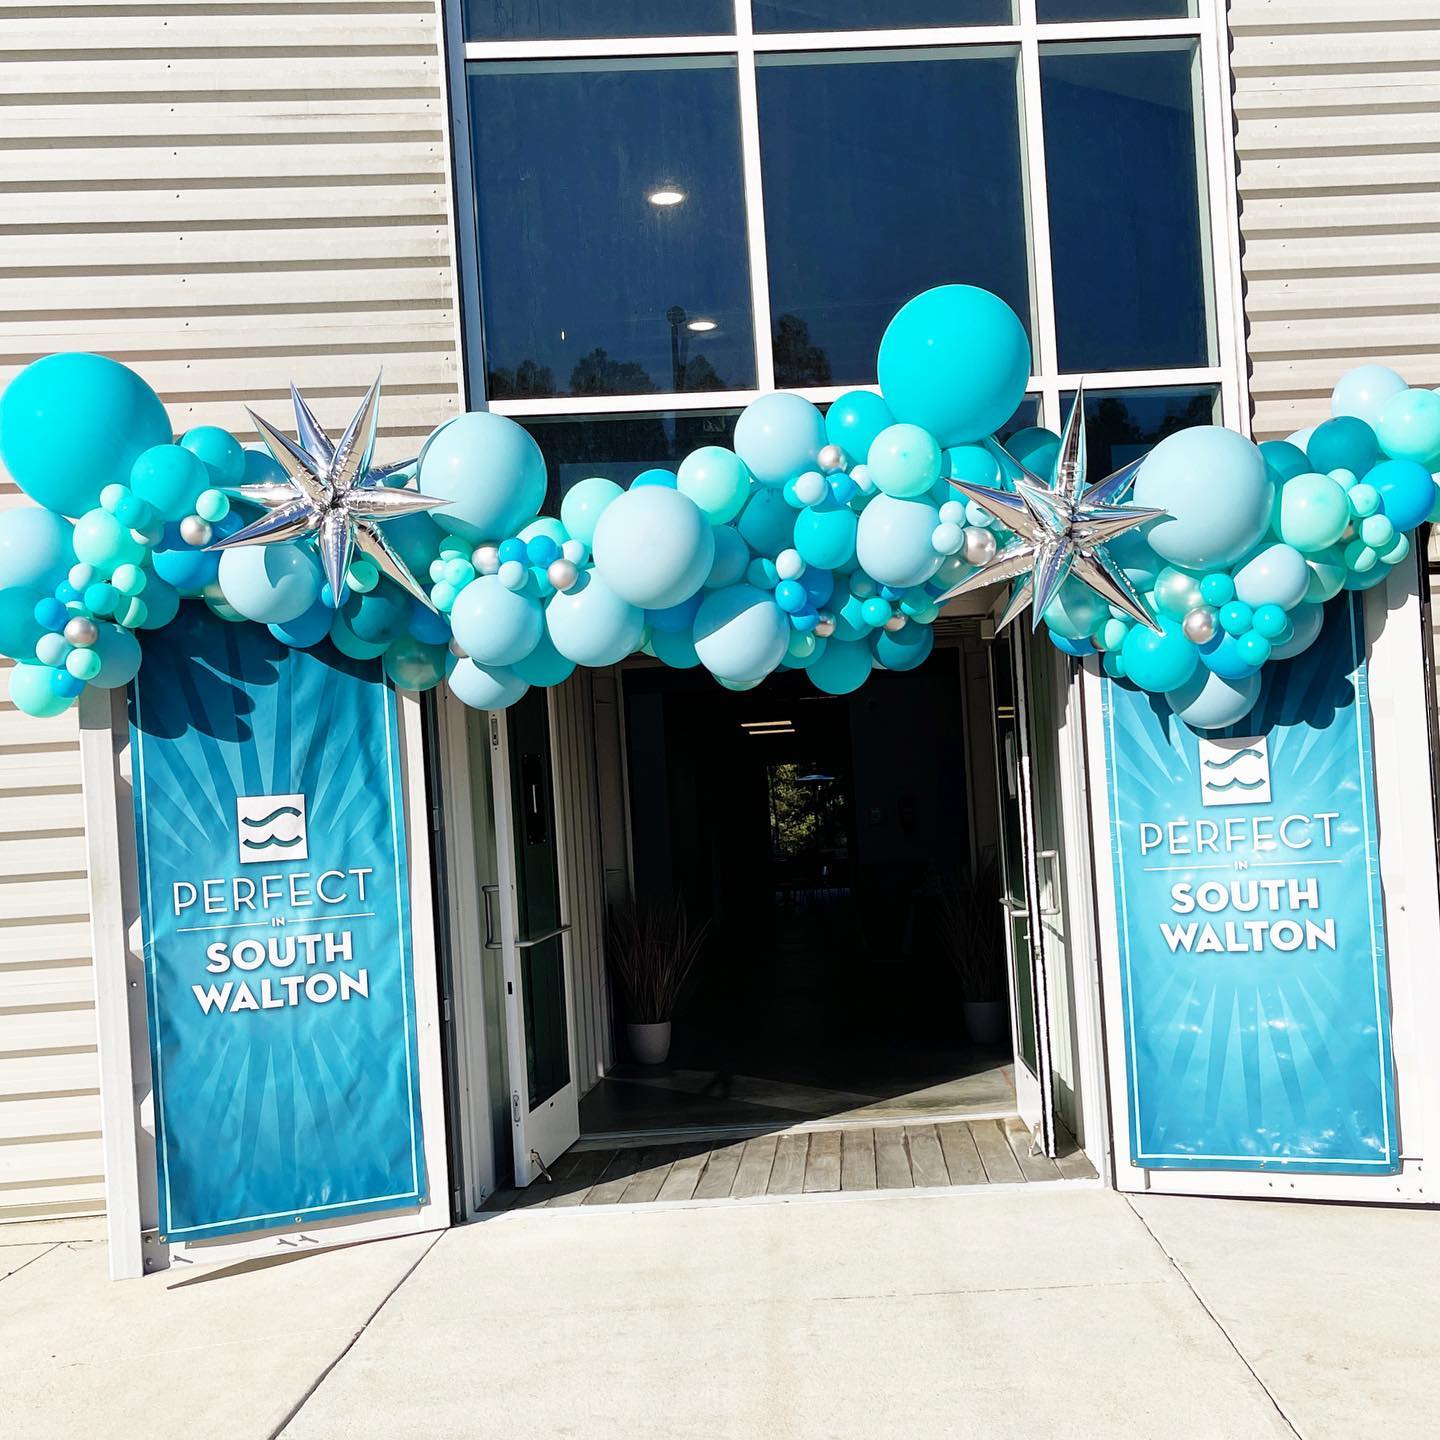 We’re Just Over Here Making Waves. 🌊 

Congrats to all the Perfect In South Walton award winners and local companies! 🏆 

Huge thanks to @southwalton for having us out to decorate & celebrate! 

Venue: @distillery98 

#sowal #southwalton #sowalbusiness #waltoncounty #balloongarland #balloonstylist #ballooncompany #boutiqueballoons #30a #sandestin #miramarbeach